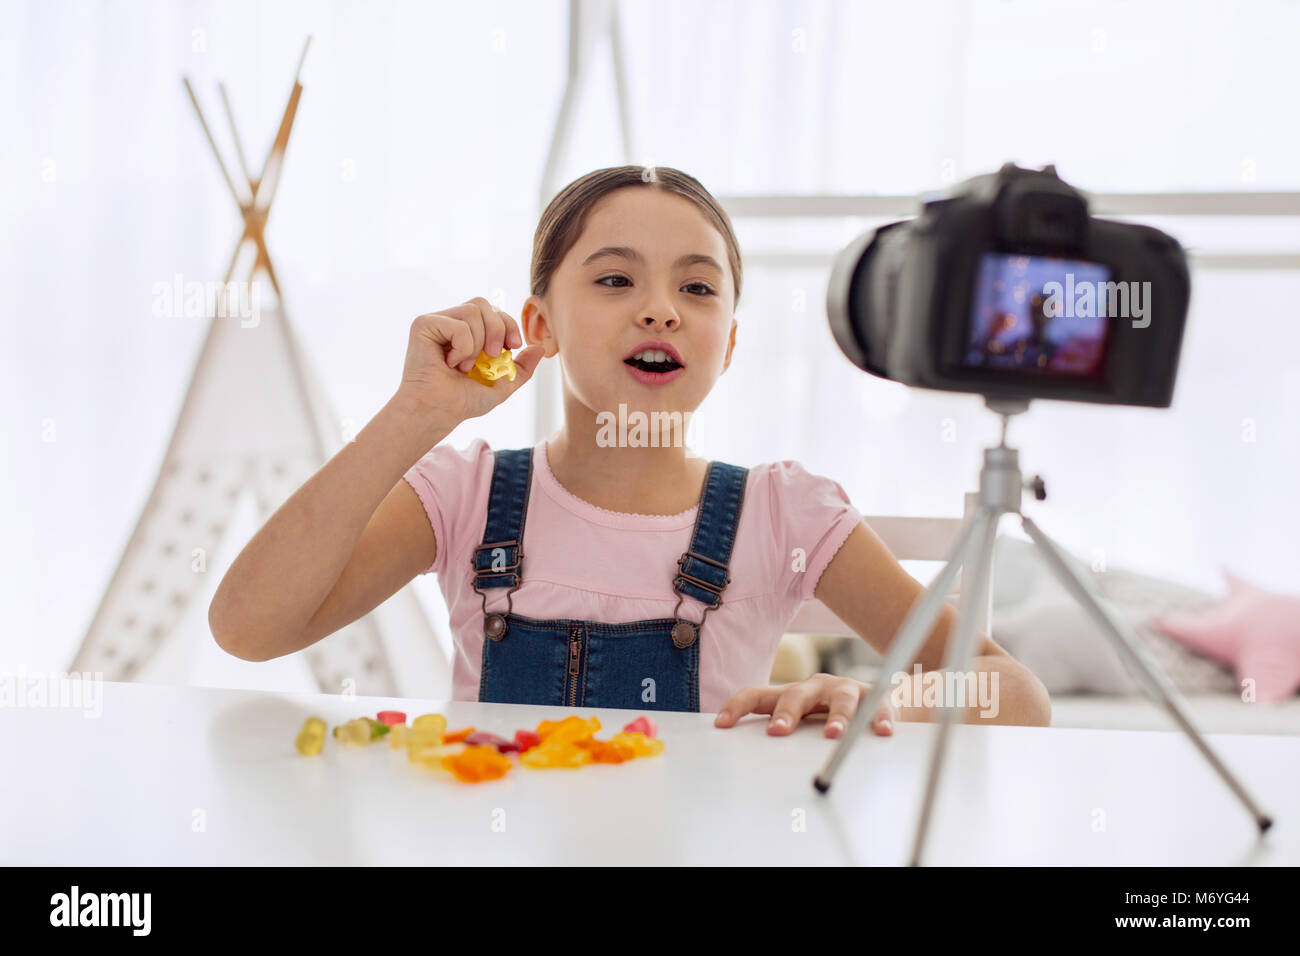 Upbeat girl speaking about taste of gummy candies in vlog Stock Photo